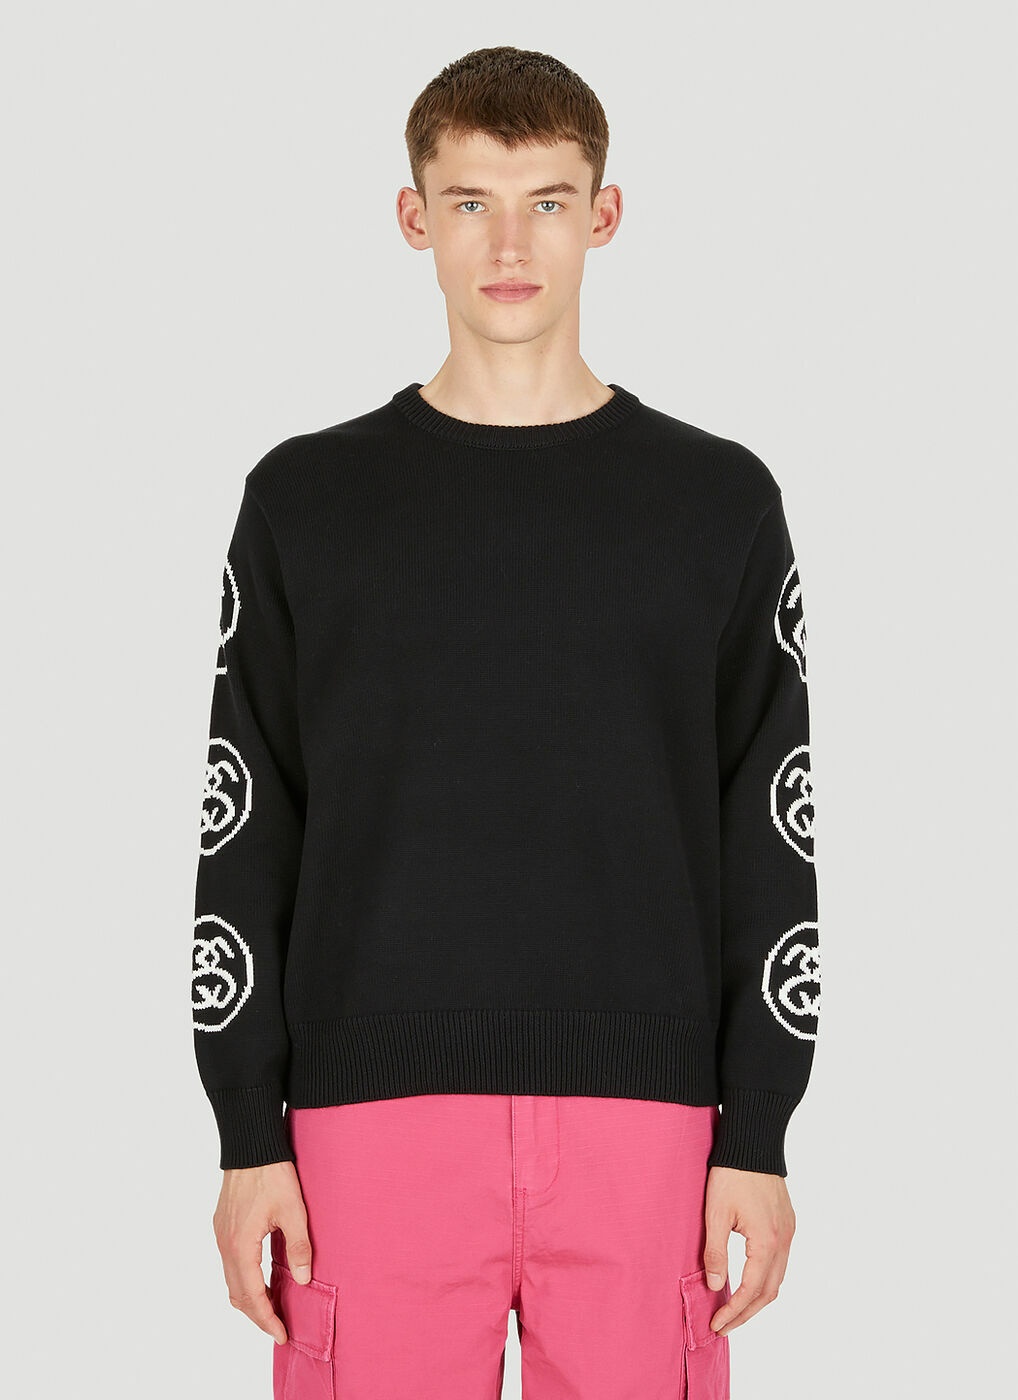 SS Link Sweater in Black Stussy